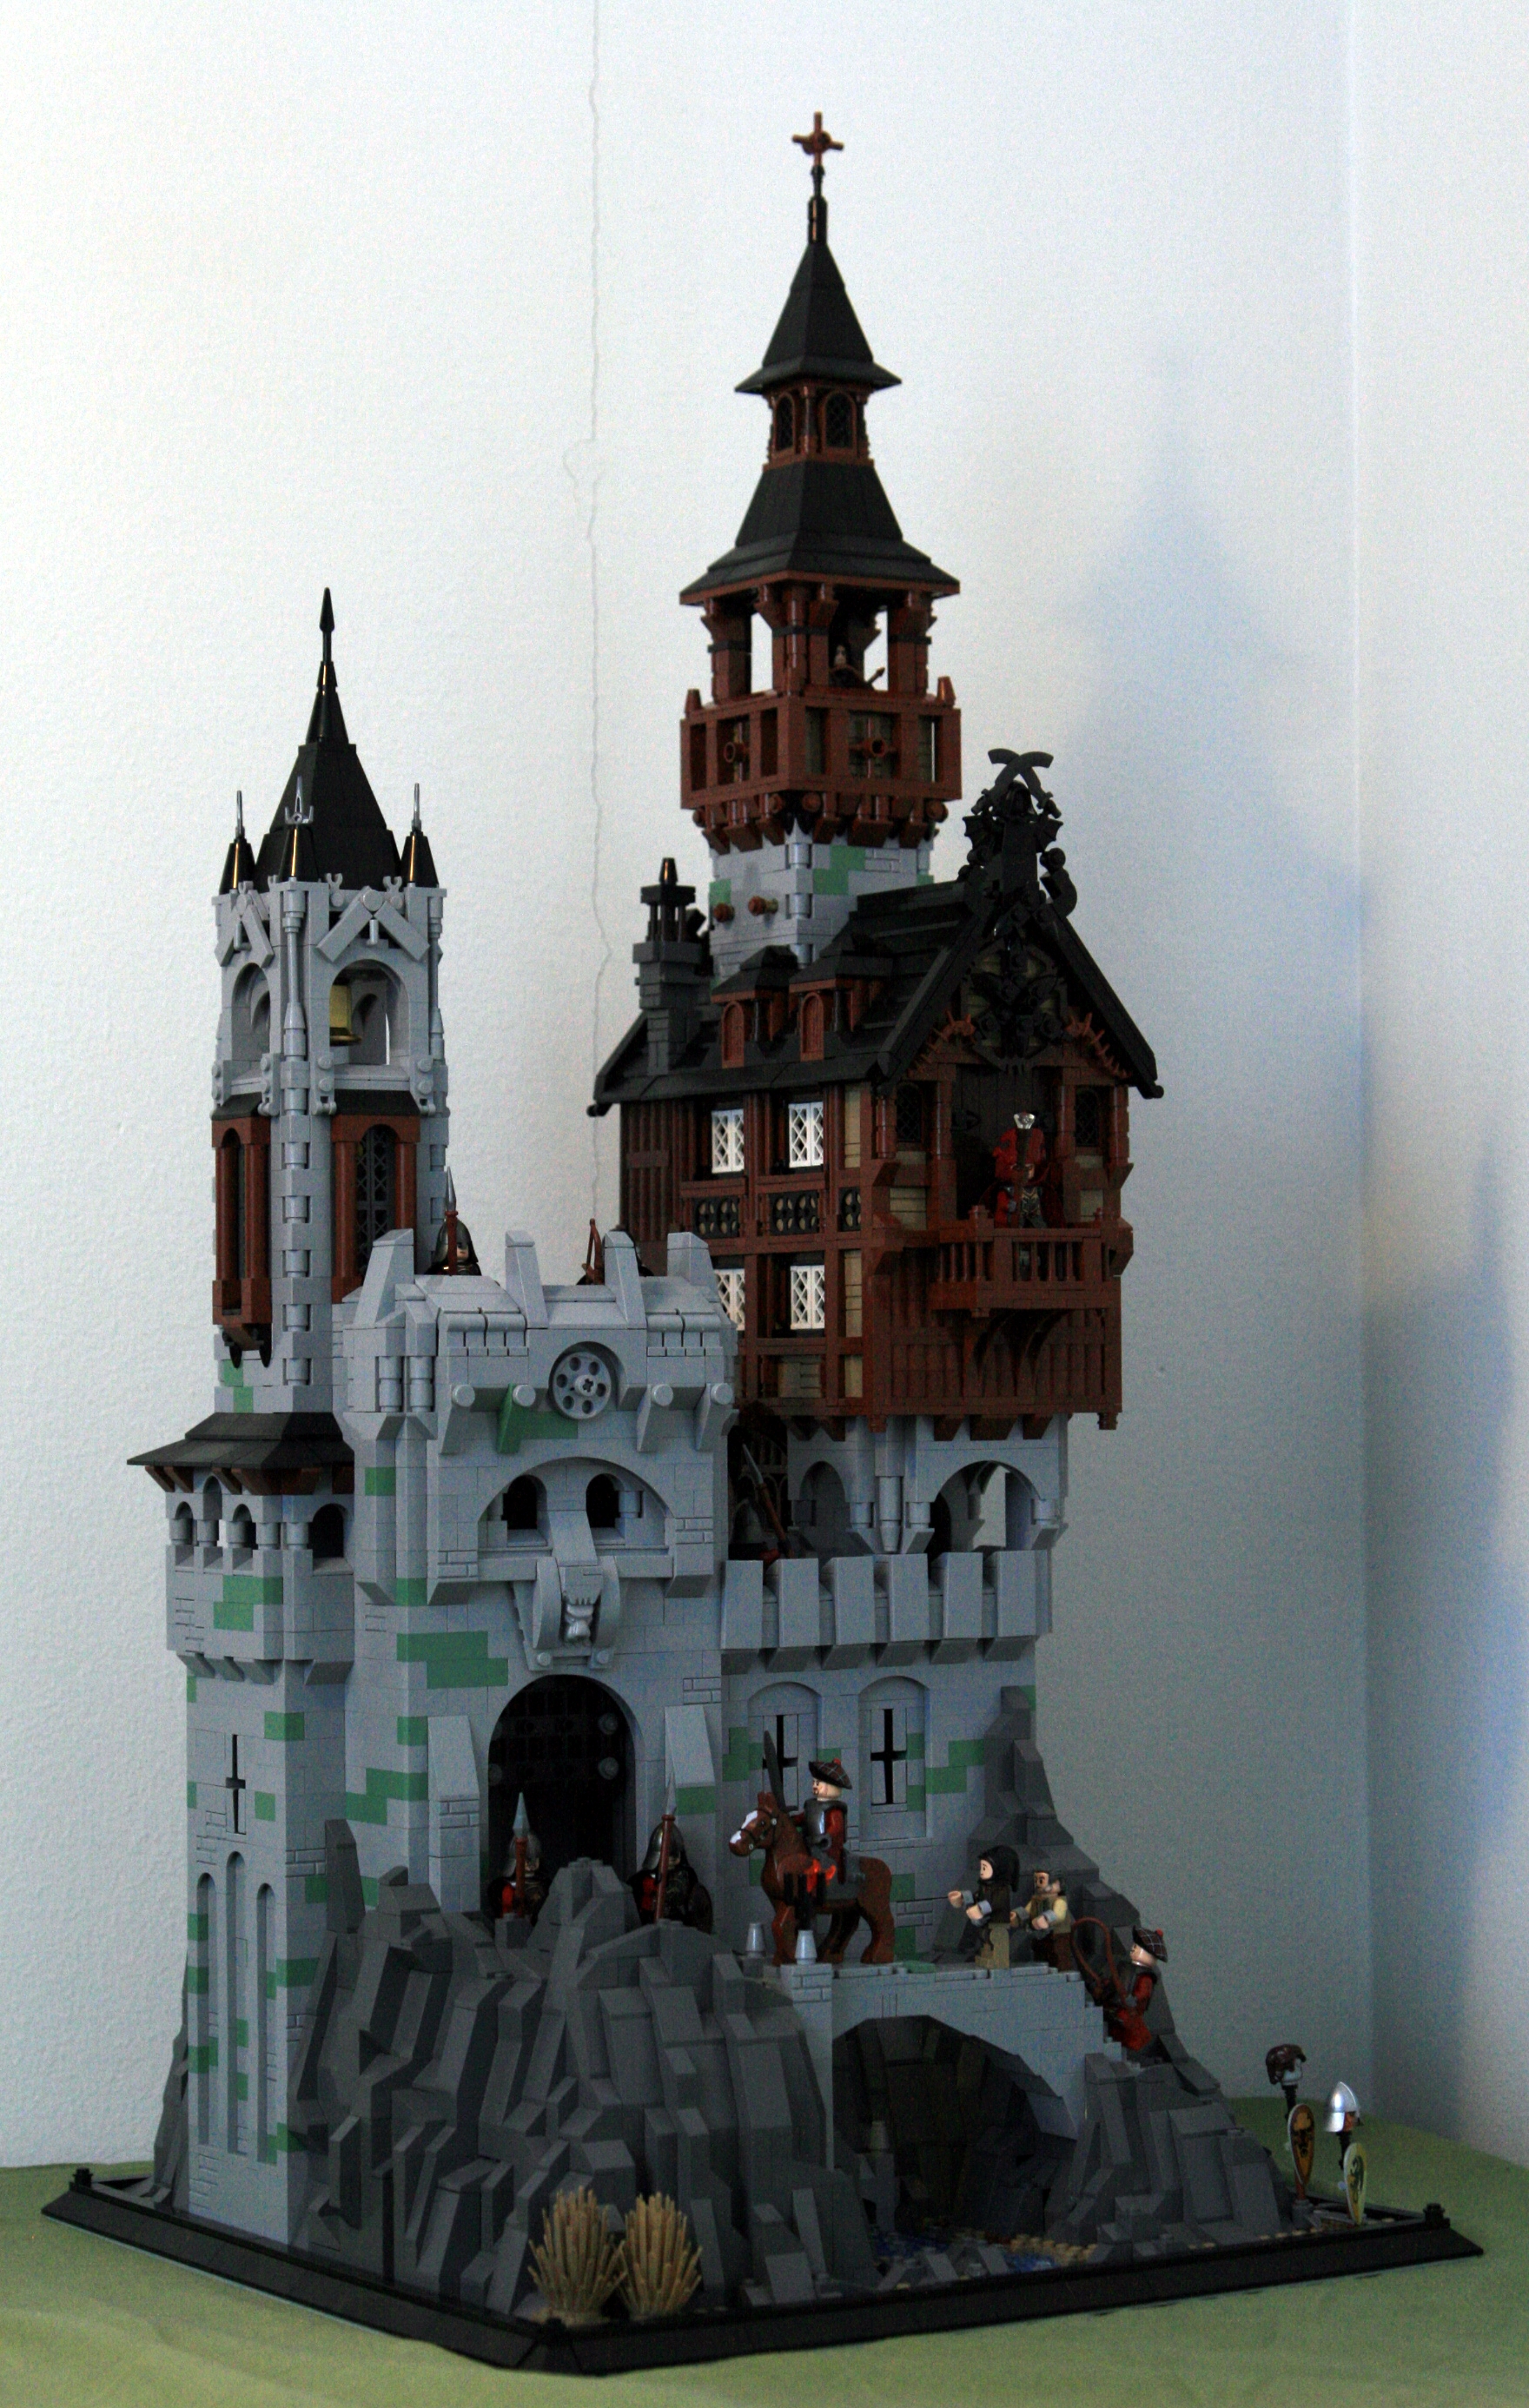 Lego Castle The Old Monastery My entry for Swebrick's